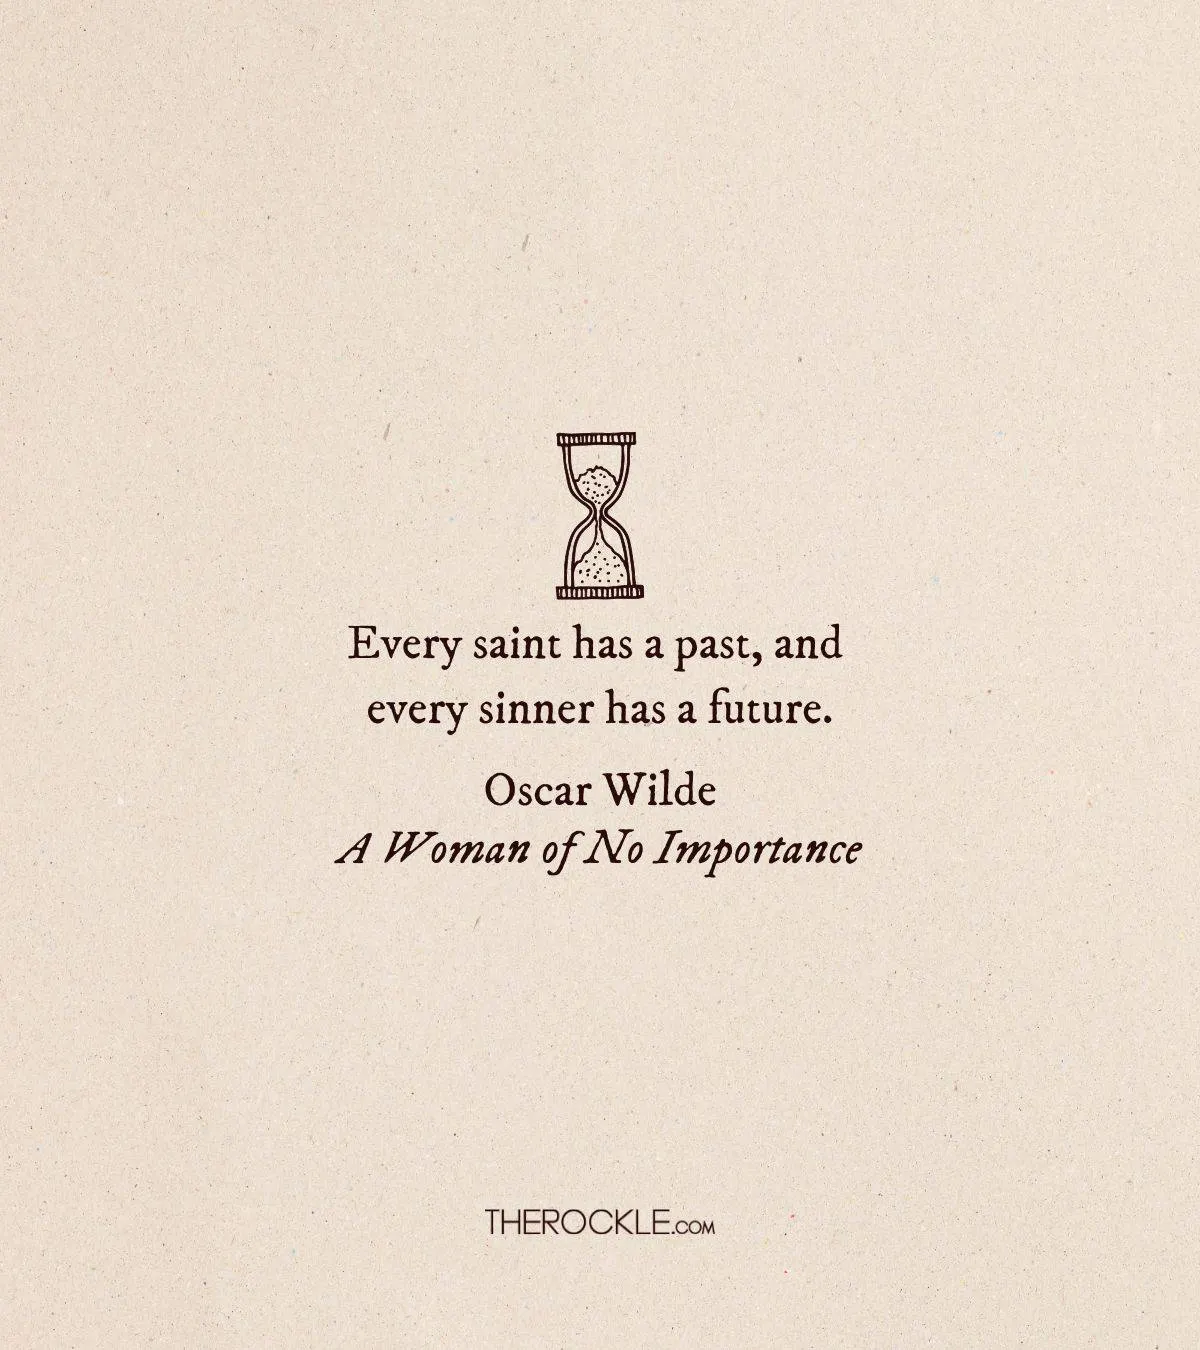 Oscar Wilde quote about redemption